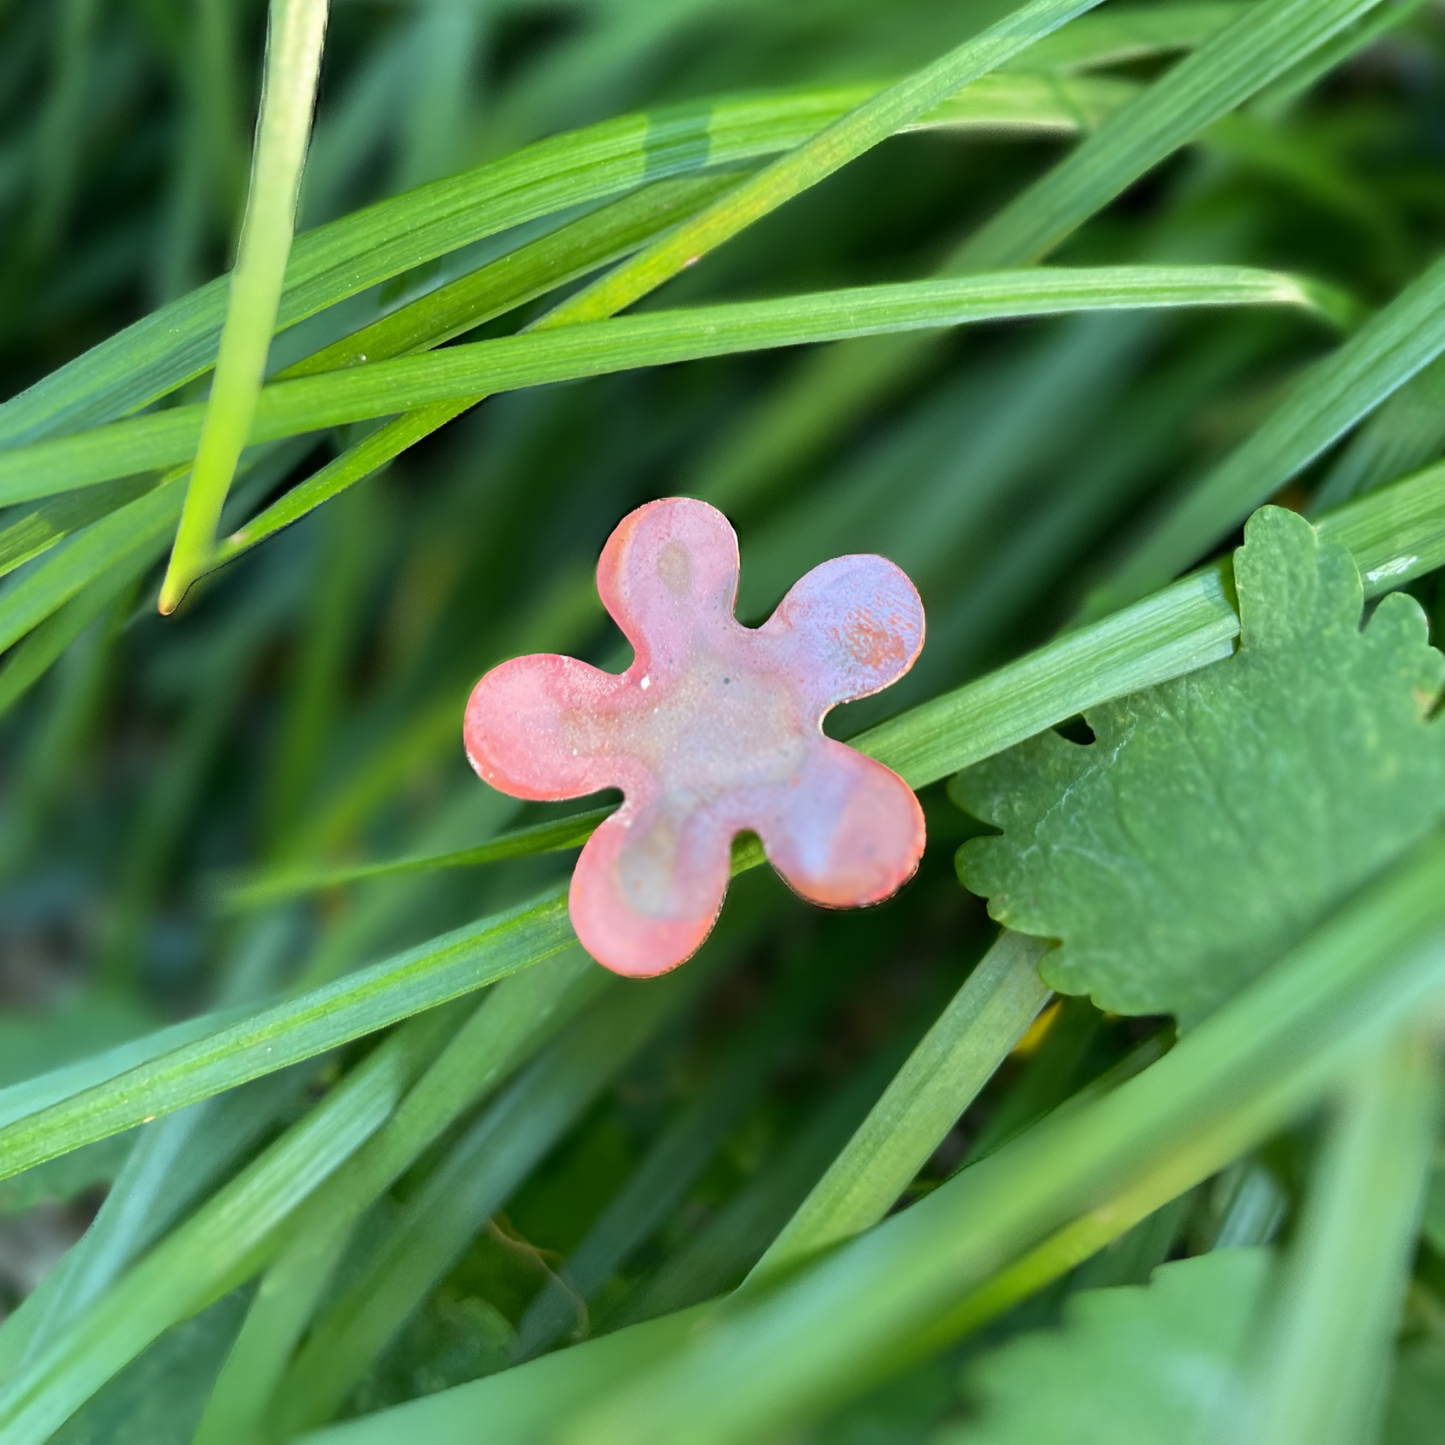 Small Natural Copper Flowers- Set of 6